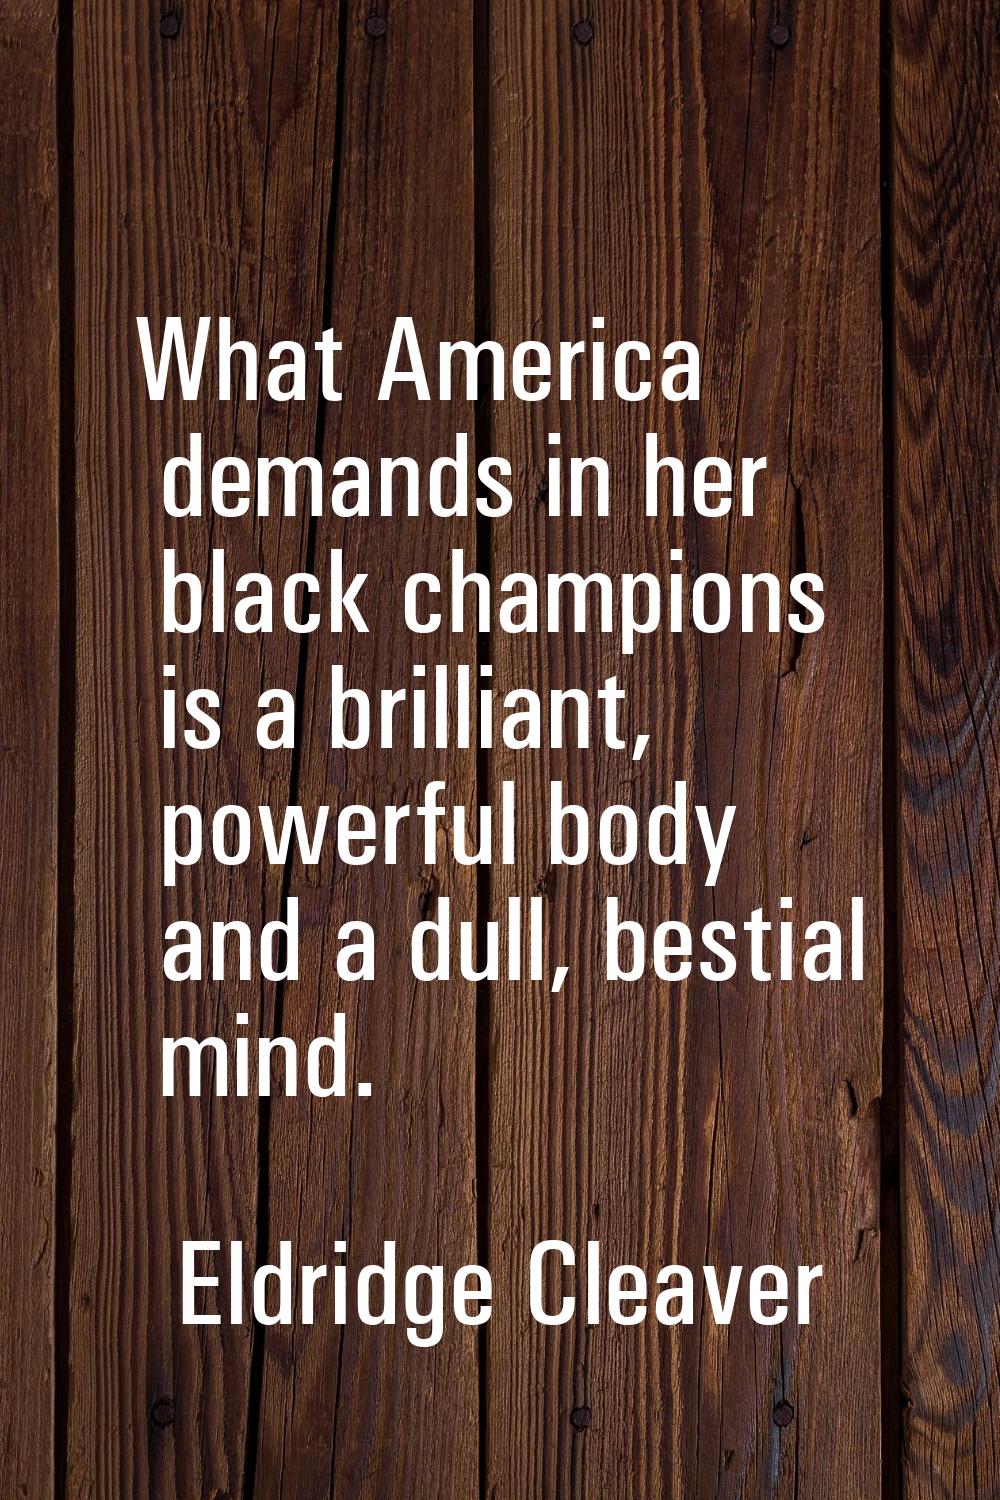 What America demands in her black champions is a brilliant, powerful body and a dull, bestial mind.